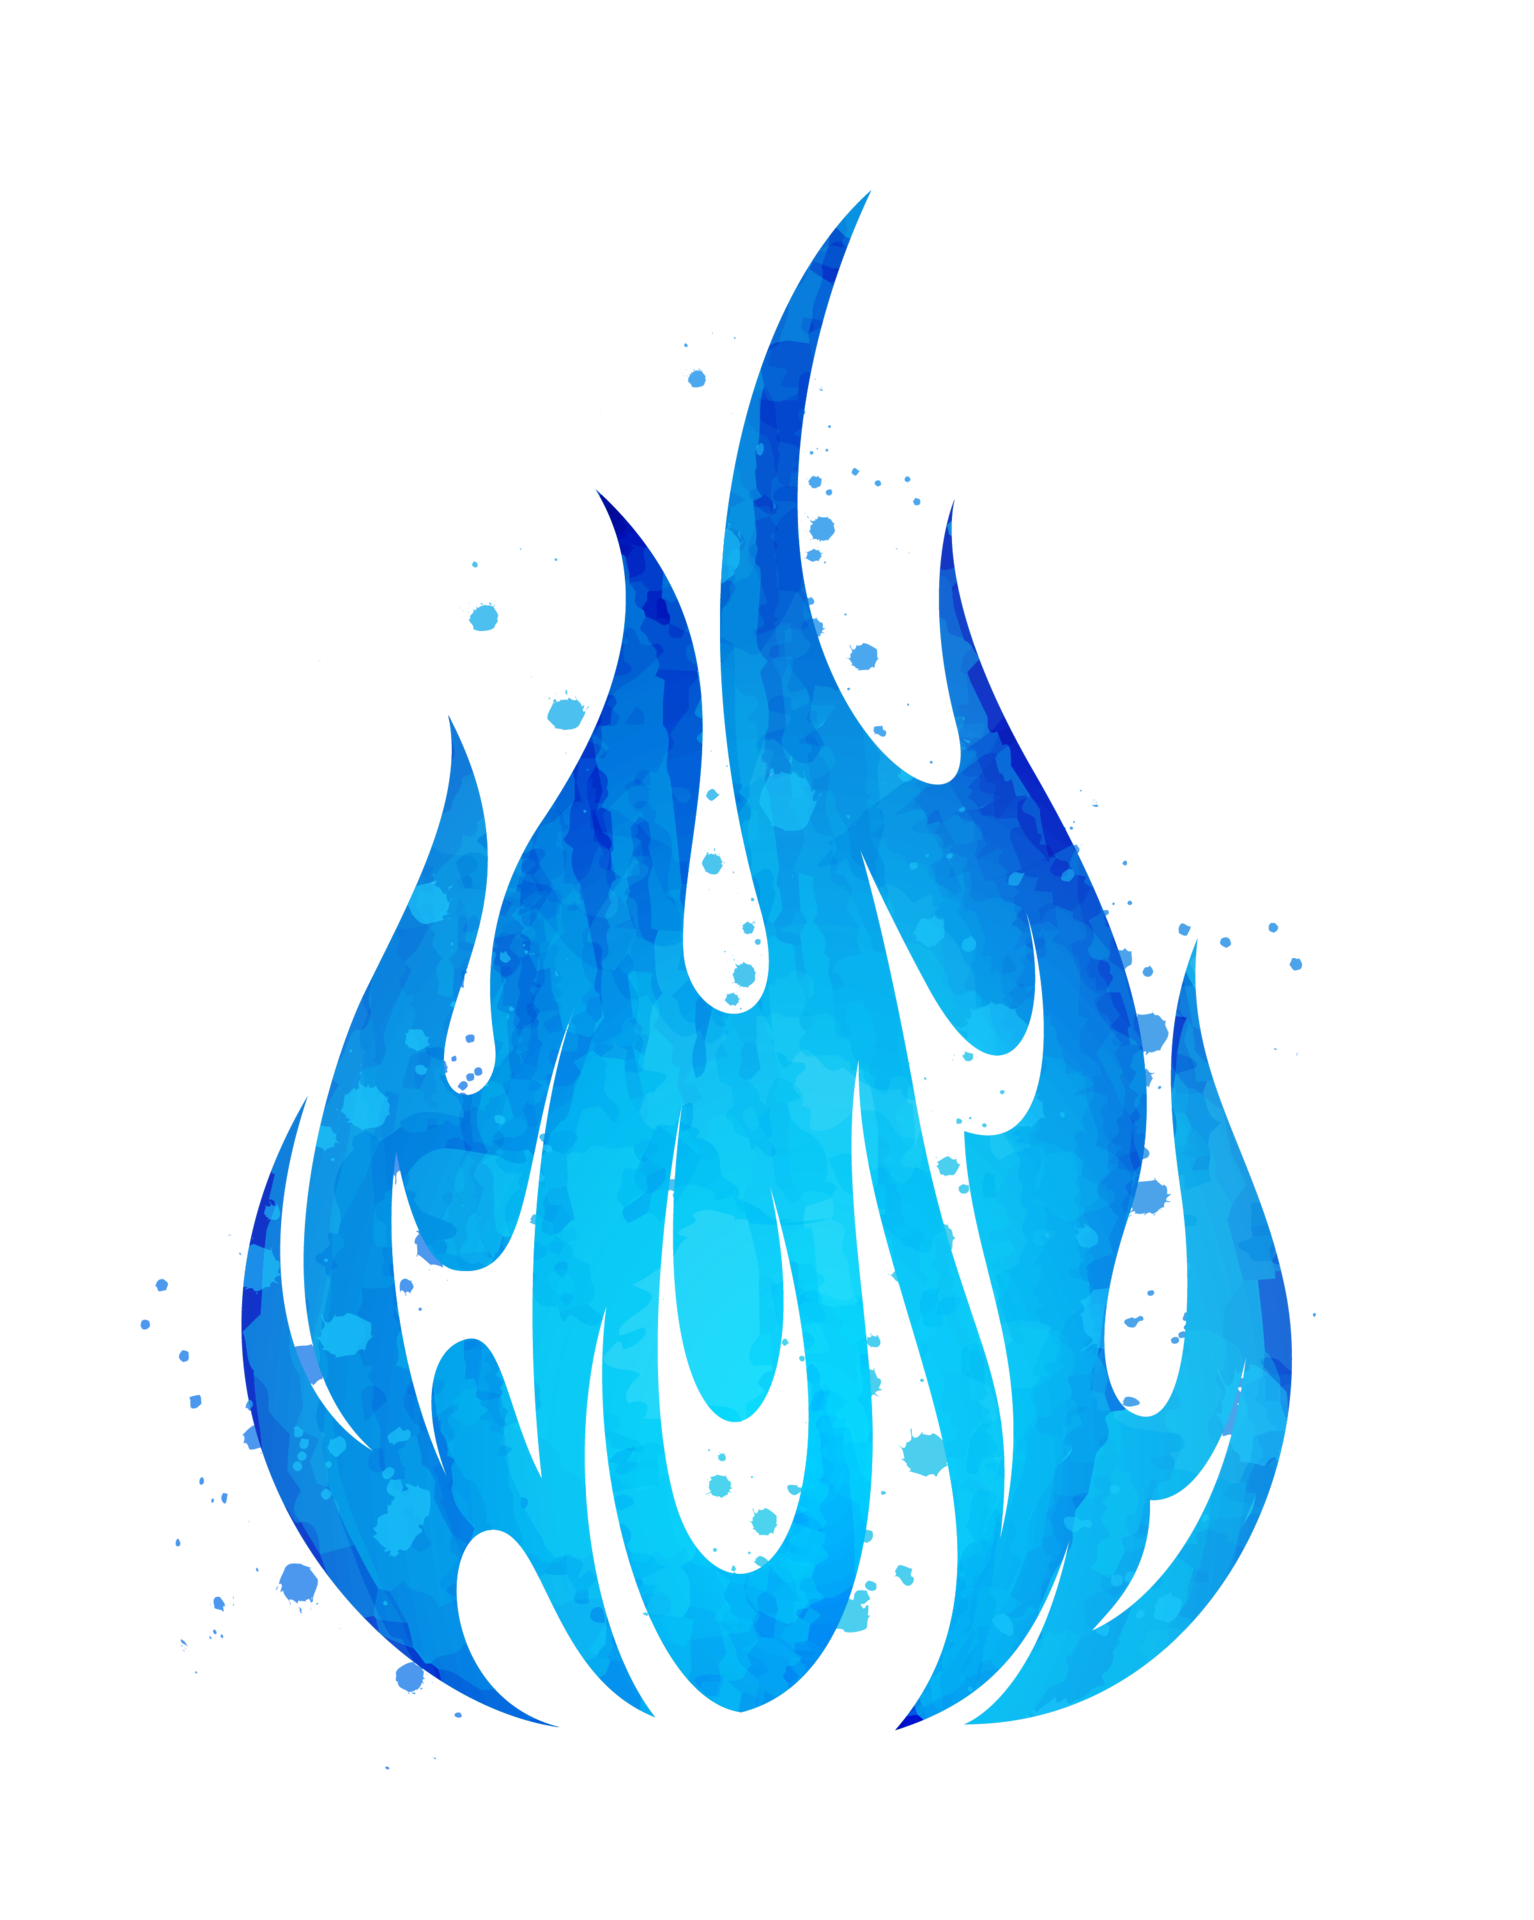 Watercolor painted blazing blue flame fire fireball illustration clipart  16016524 PNG